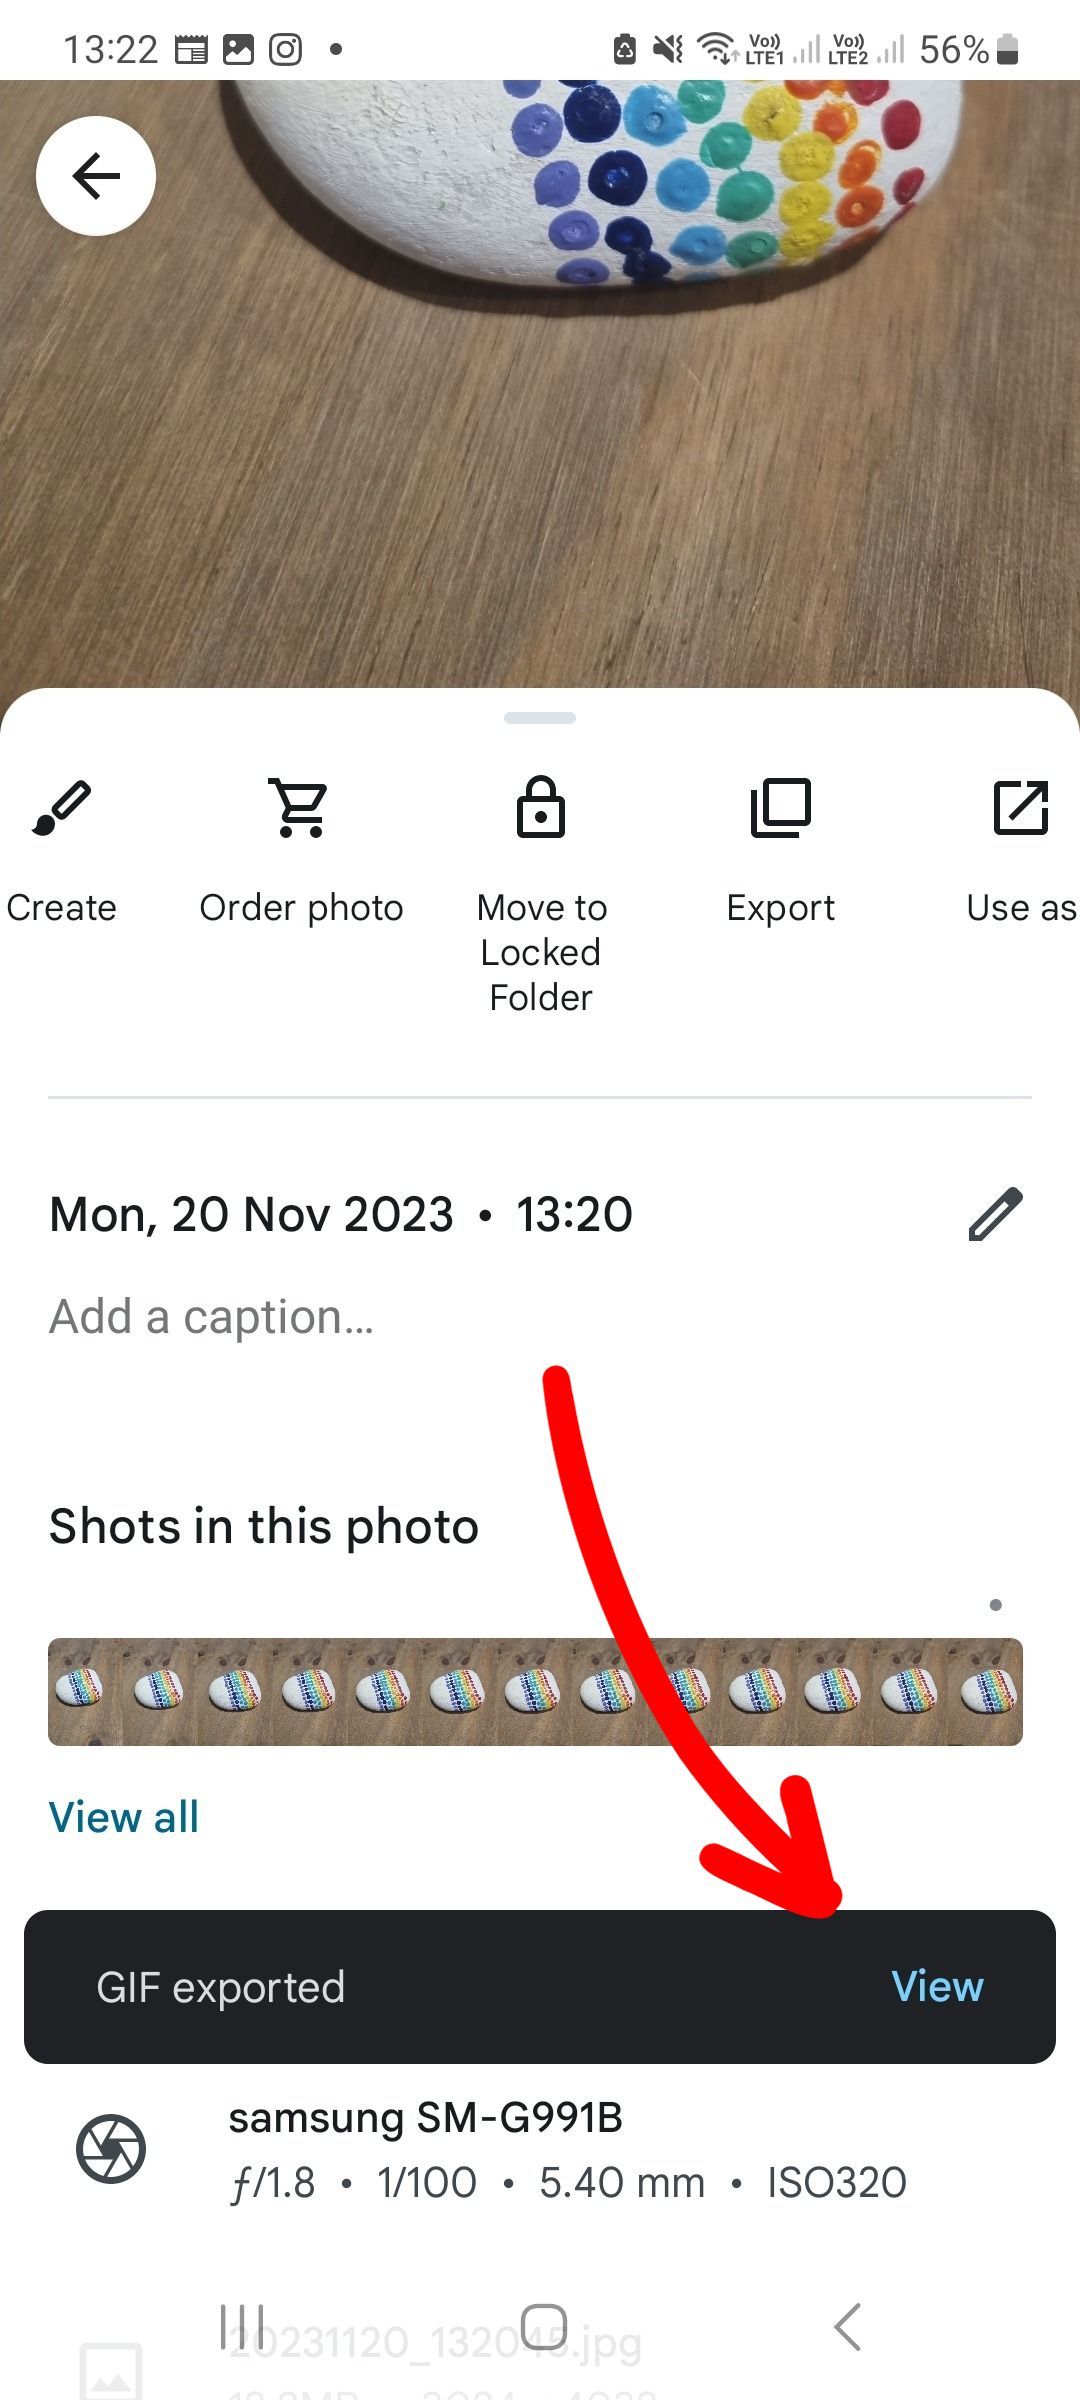 Samsung Google Photo app gif exported confirmation message